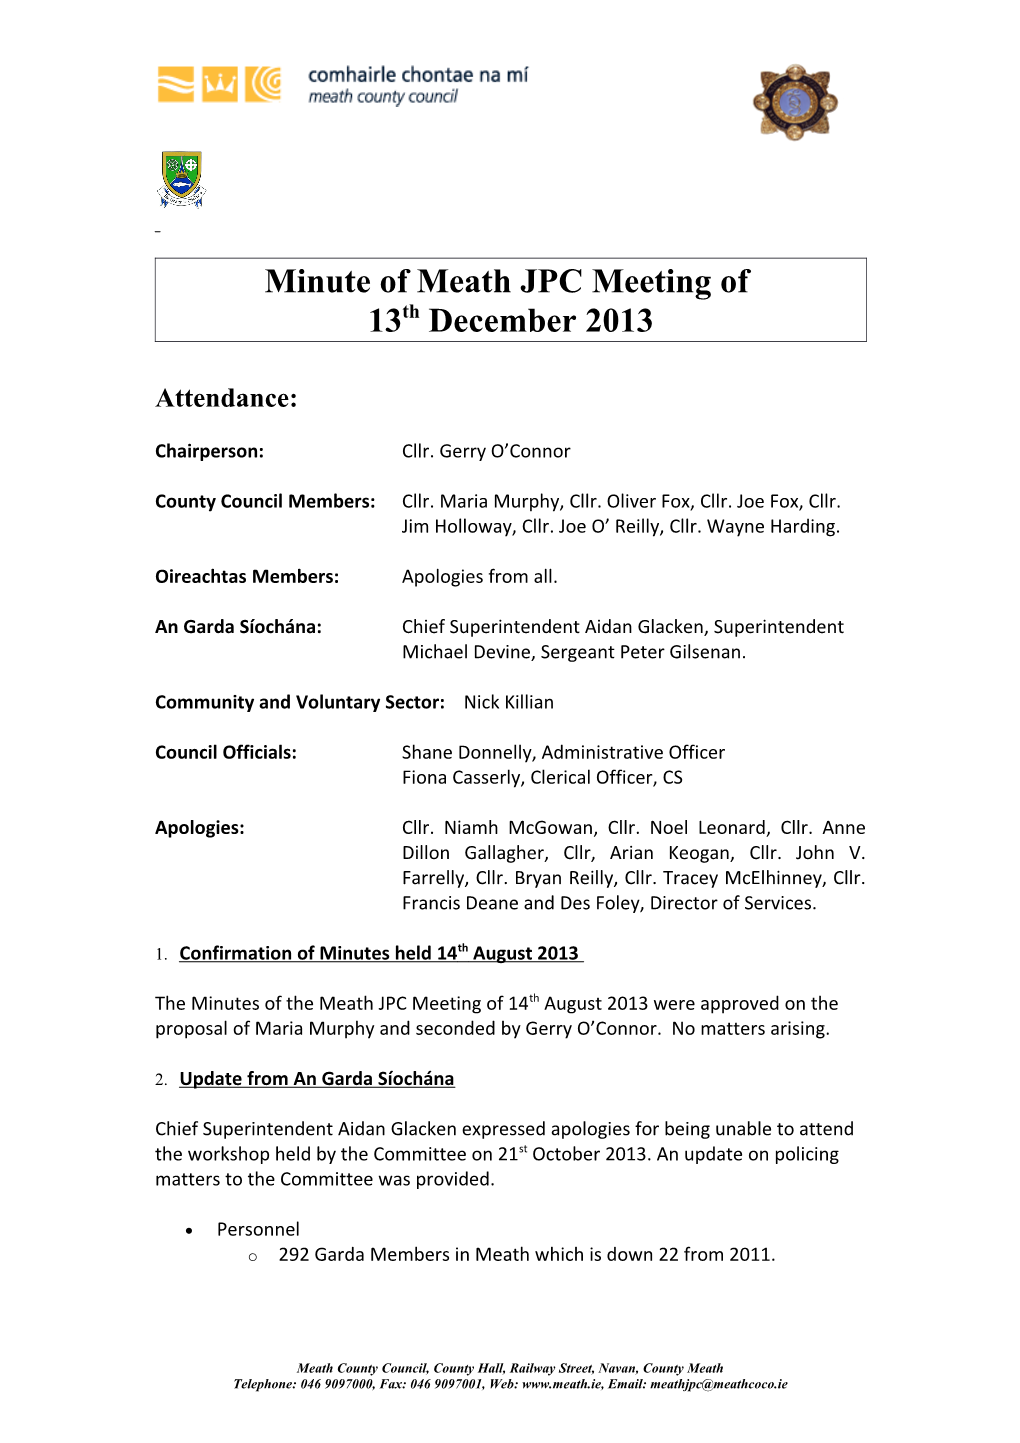 Minute of Meath JPC Meeting Of